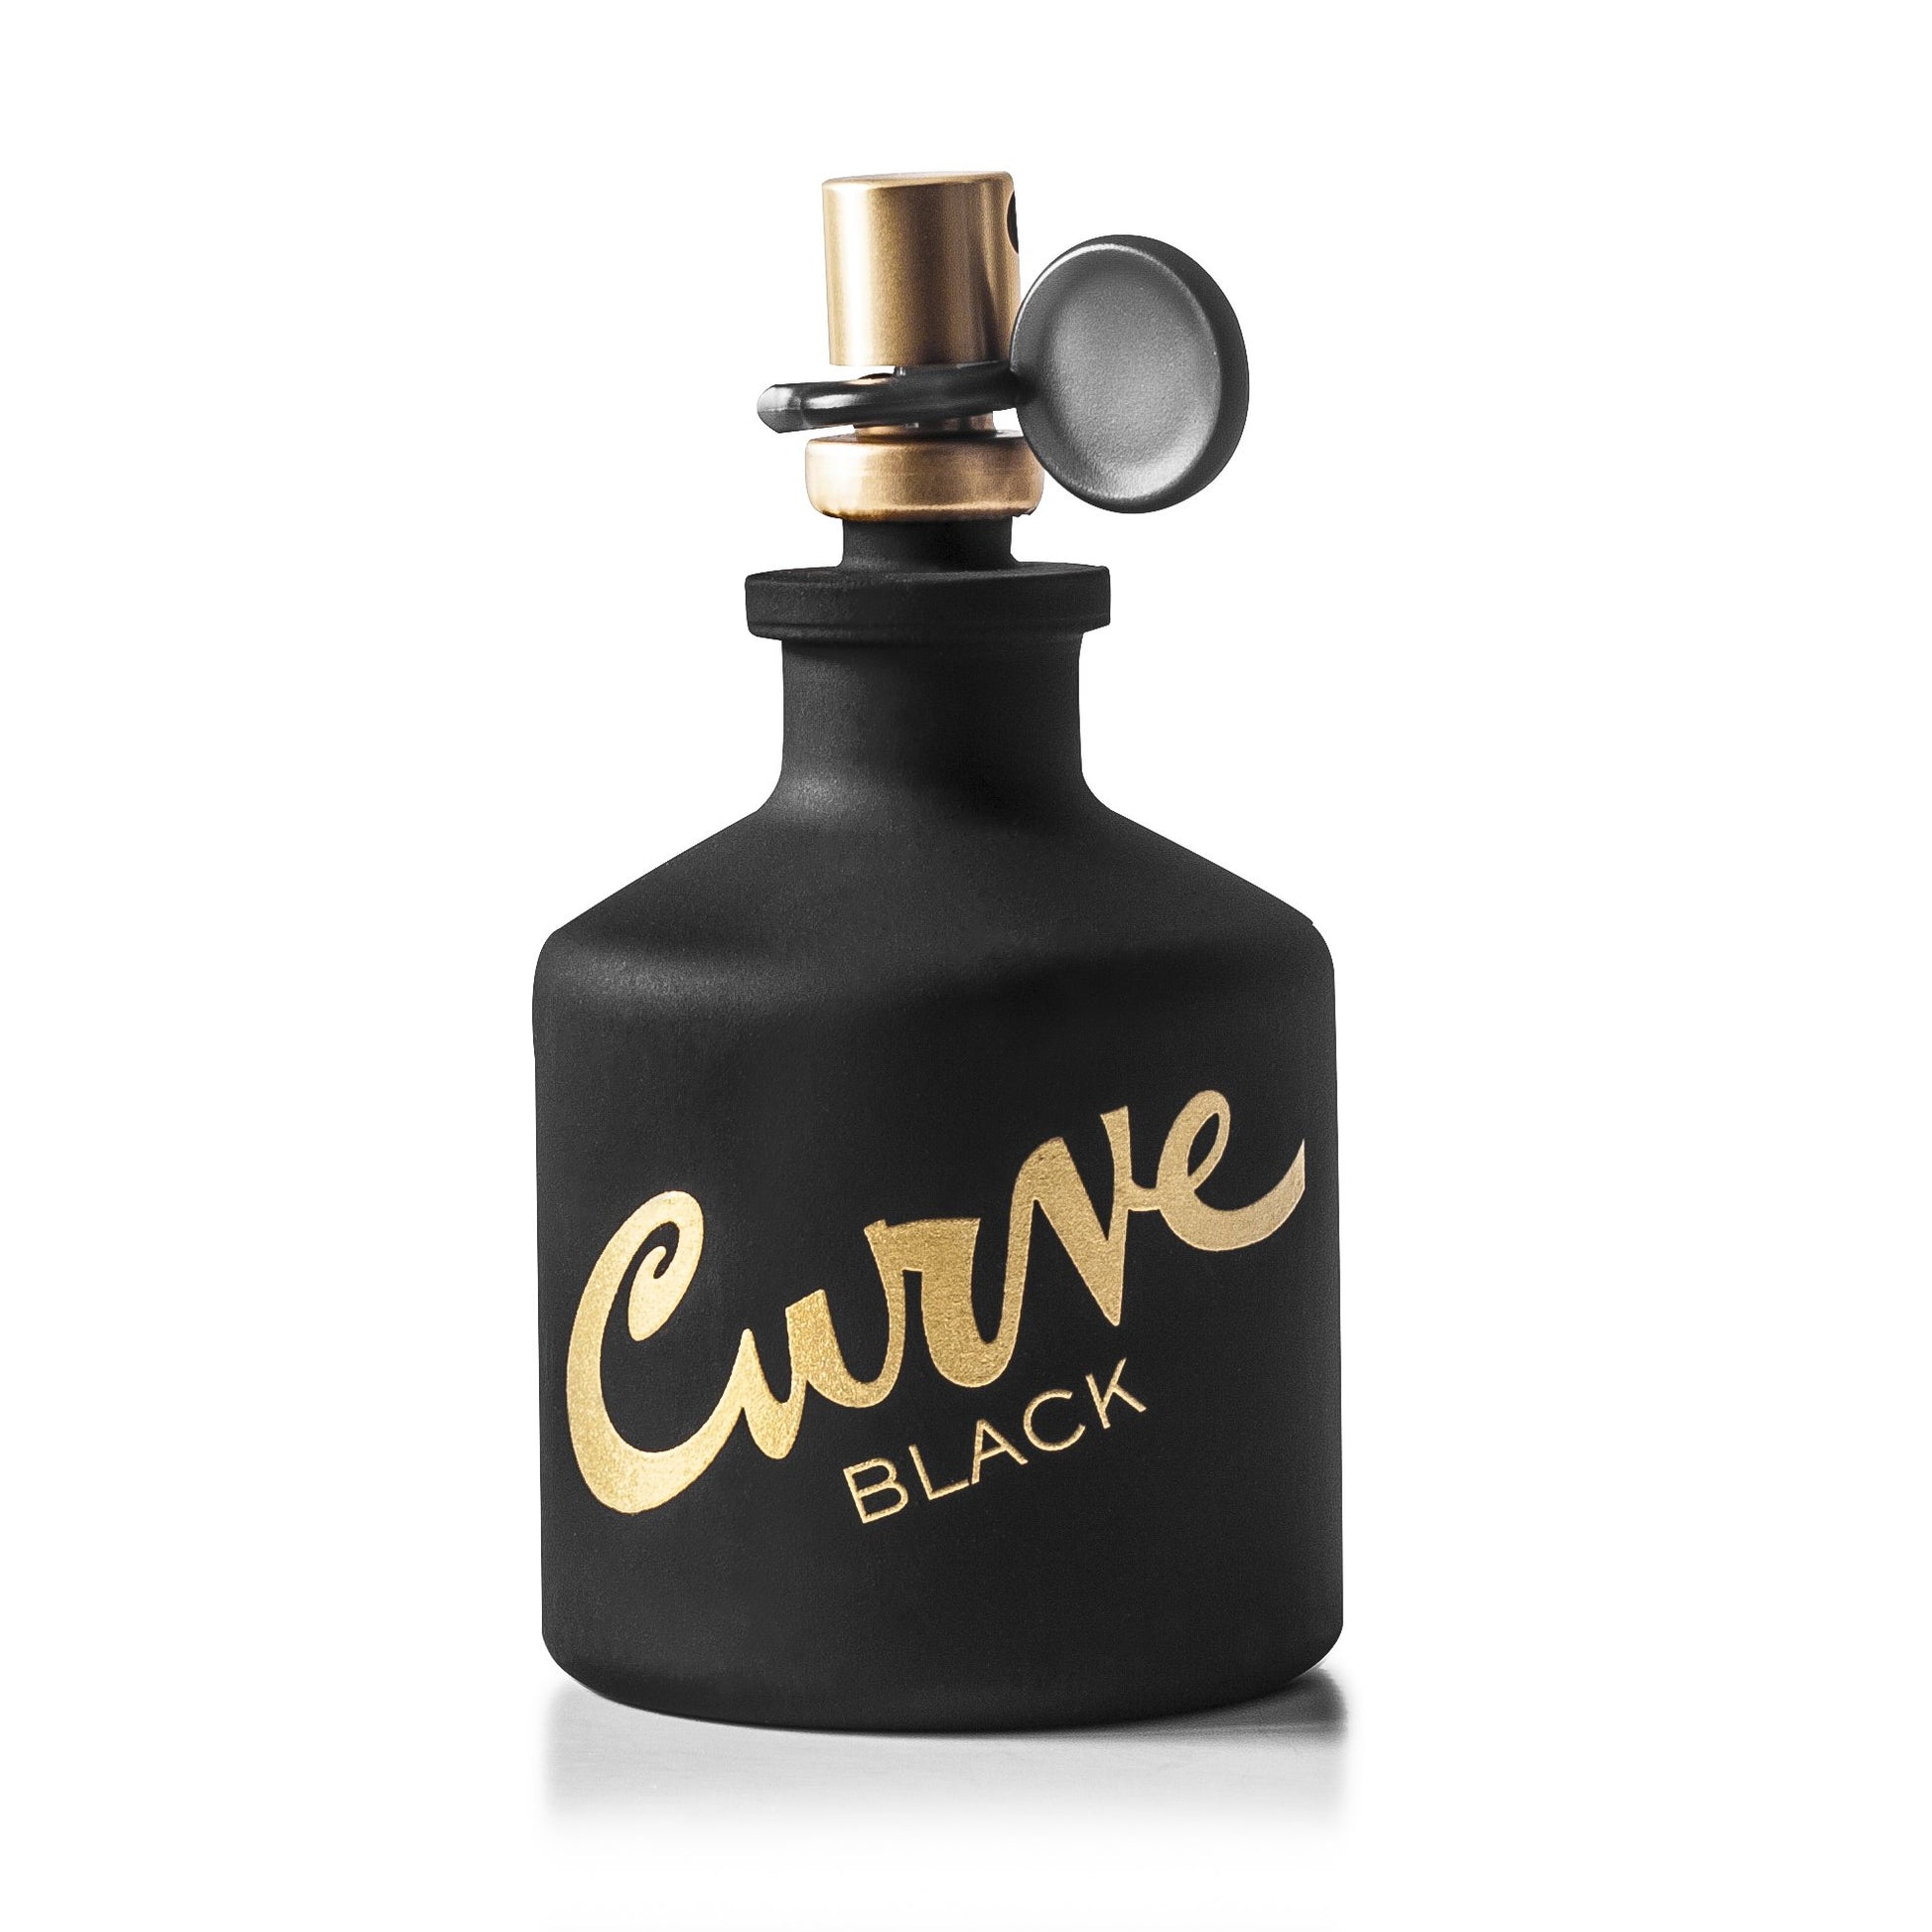 Curve Black Cologne Spray for Men by Claiborne 2.5 oz. Click to open in modal